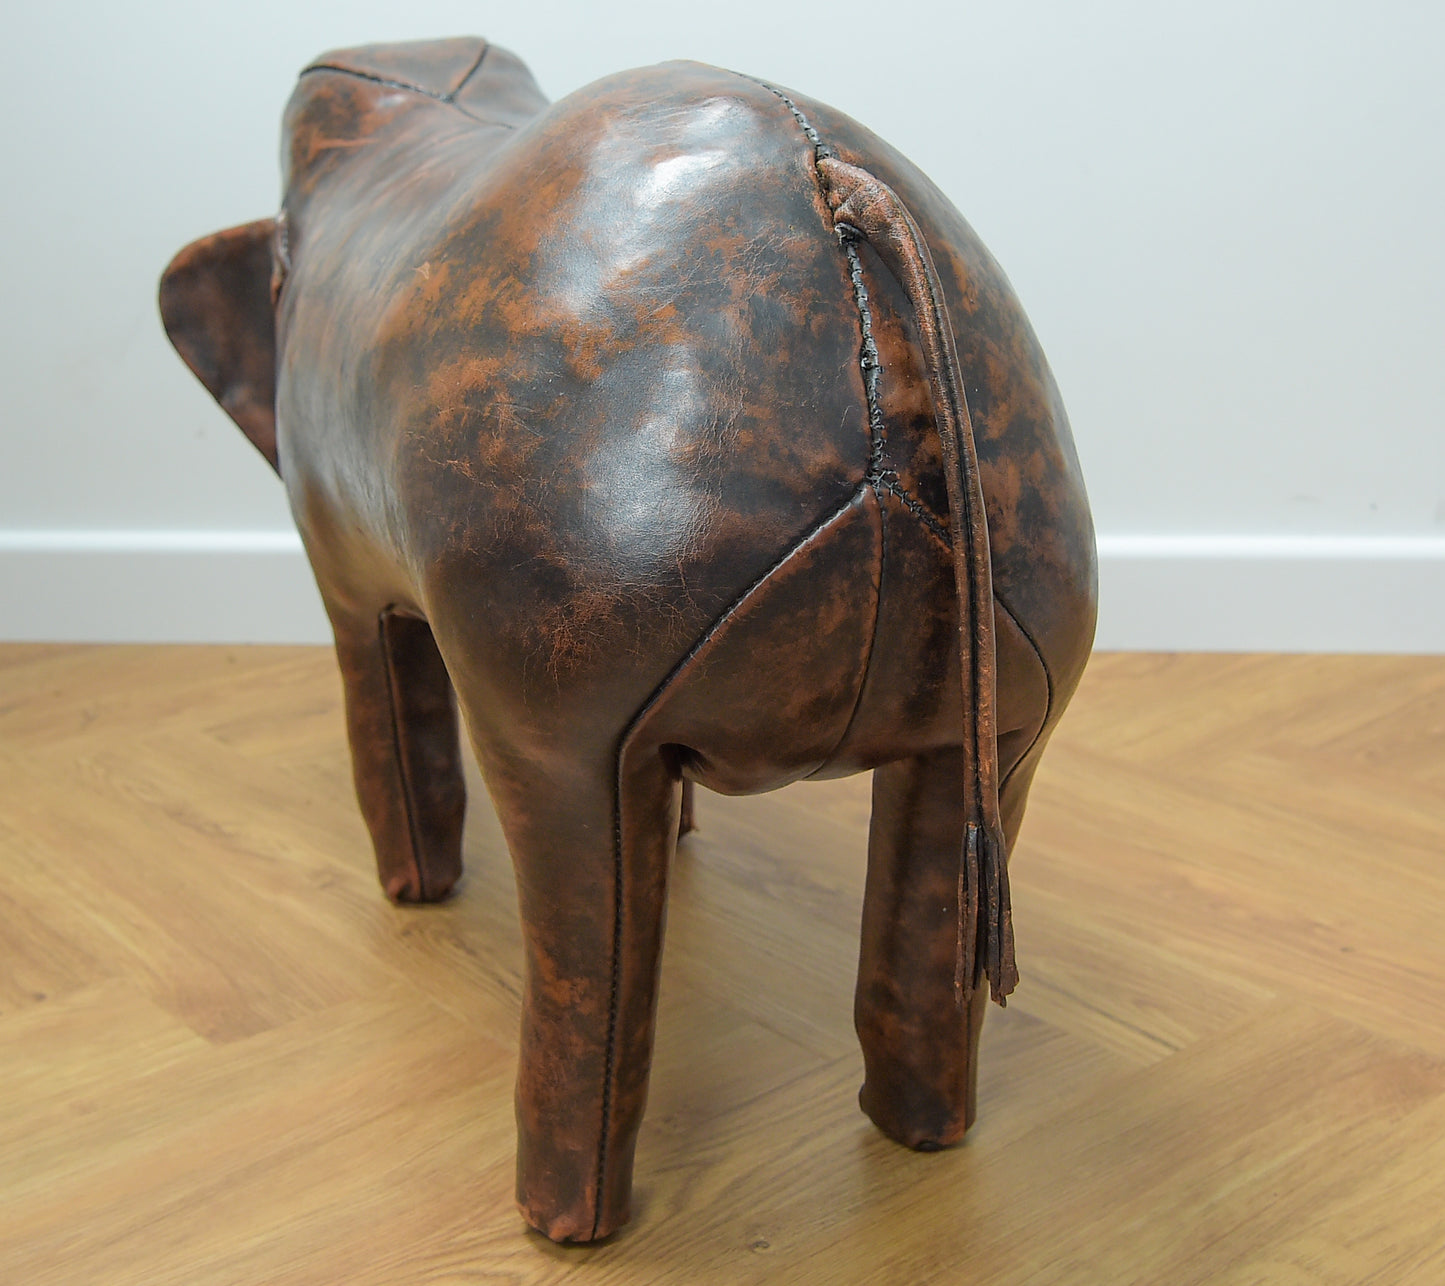 Large Original Dimitri Omersa Leather Elephant Footstool For Liberty's Of London.1960's.